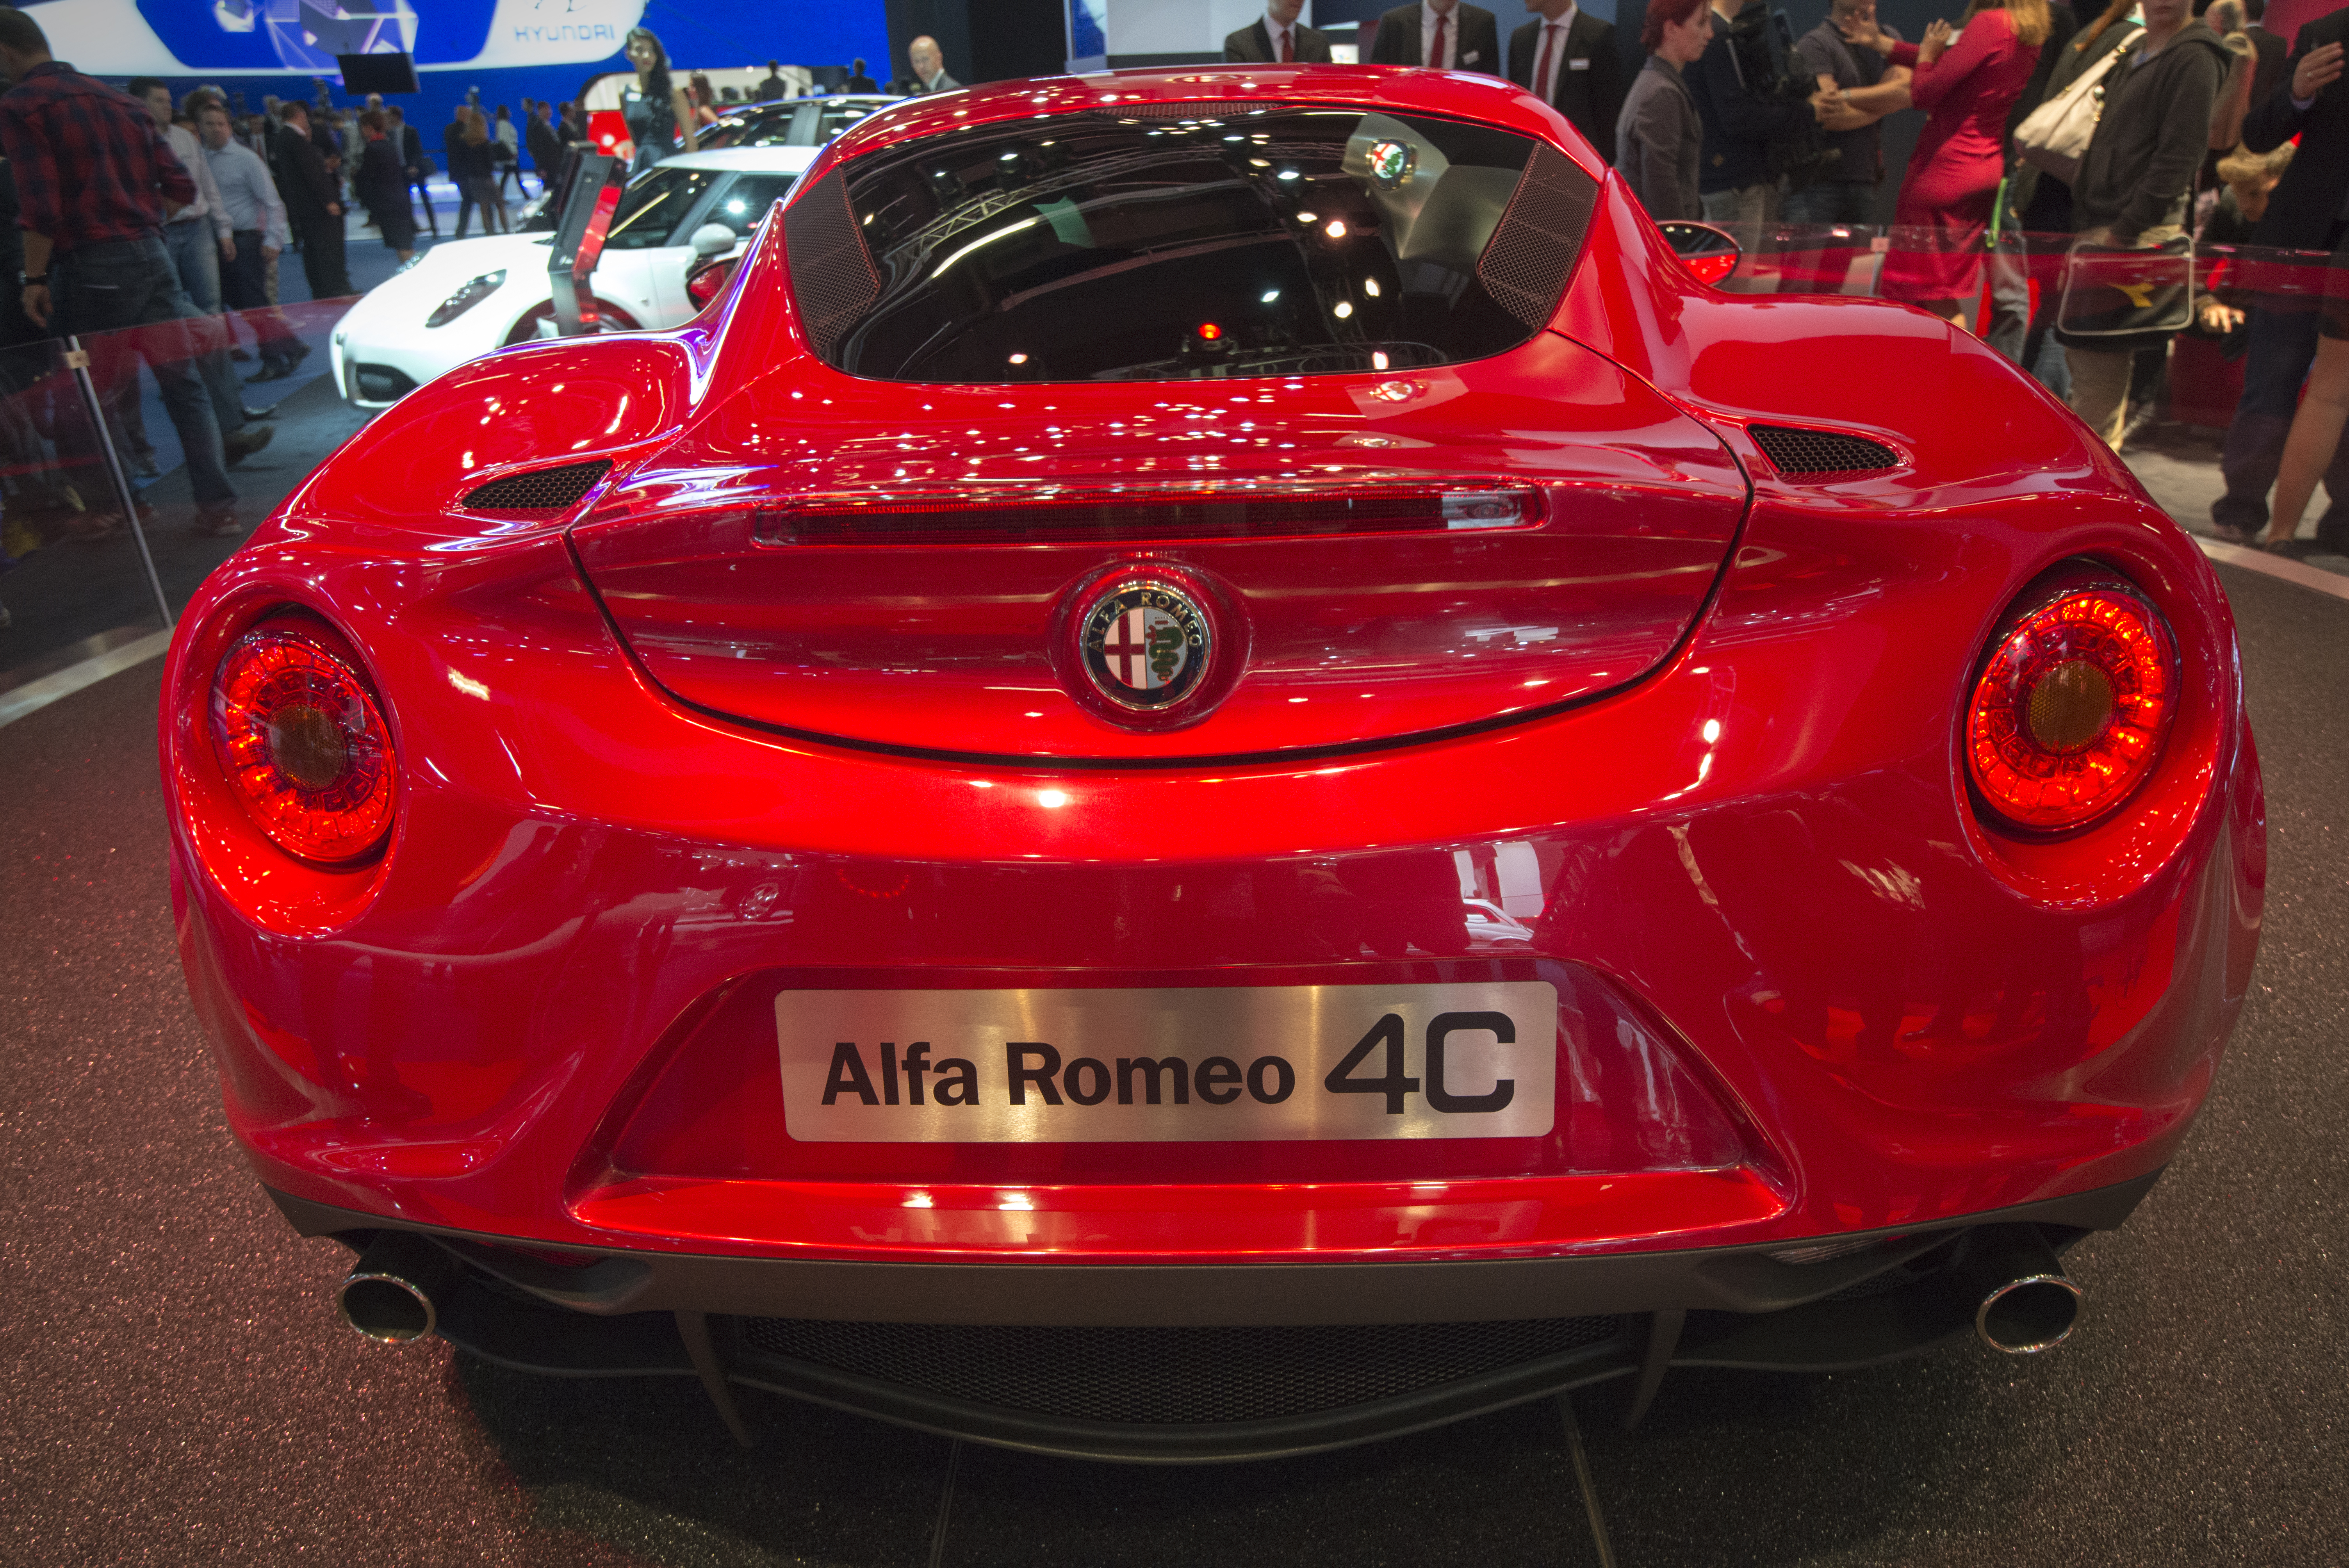 The brand will use the iconic Alfa Romeo 4C as a base